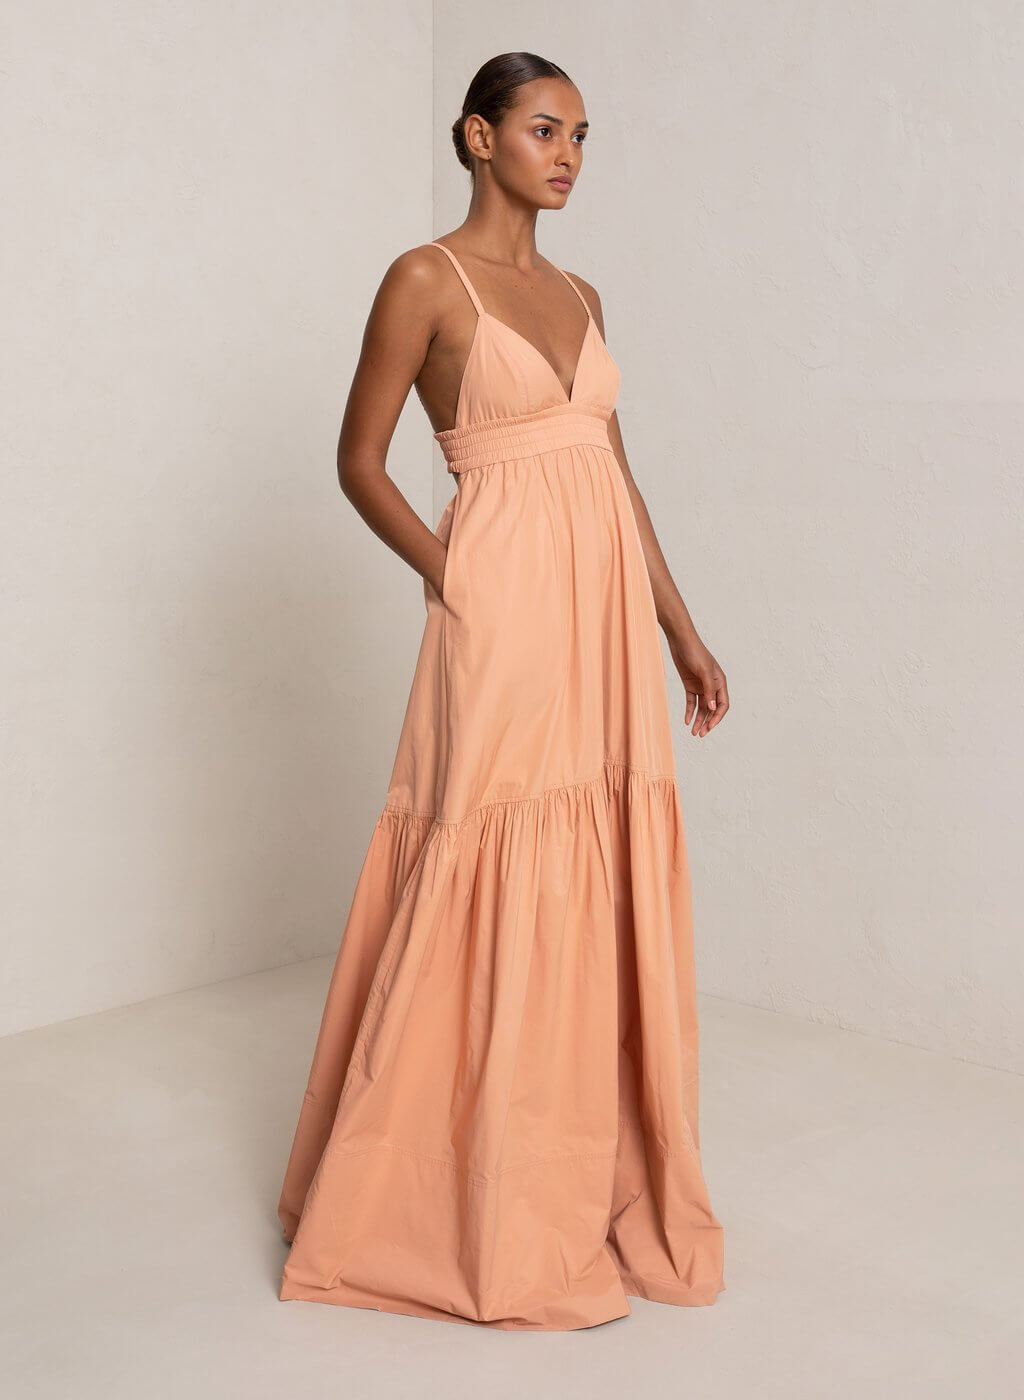 A.L.C Rosanna Maxi Dress in Dusty Coral from The New Trend